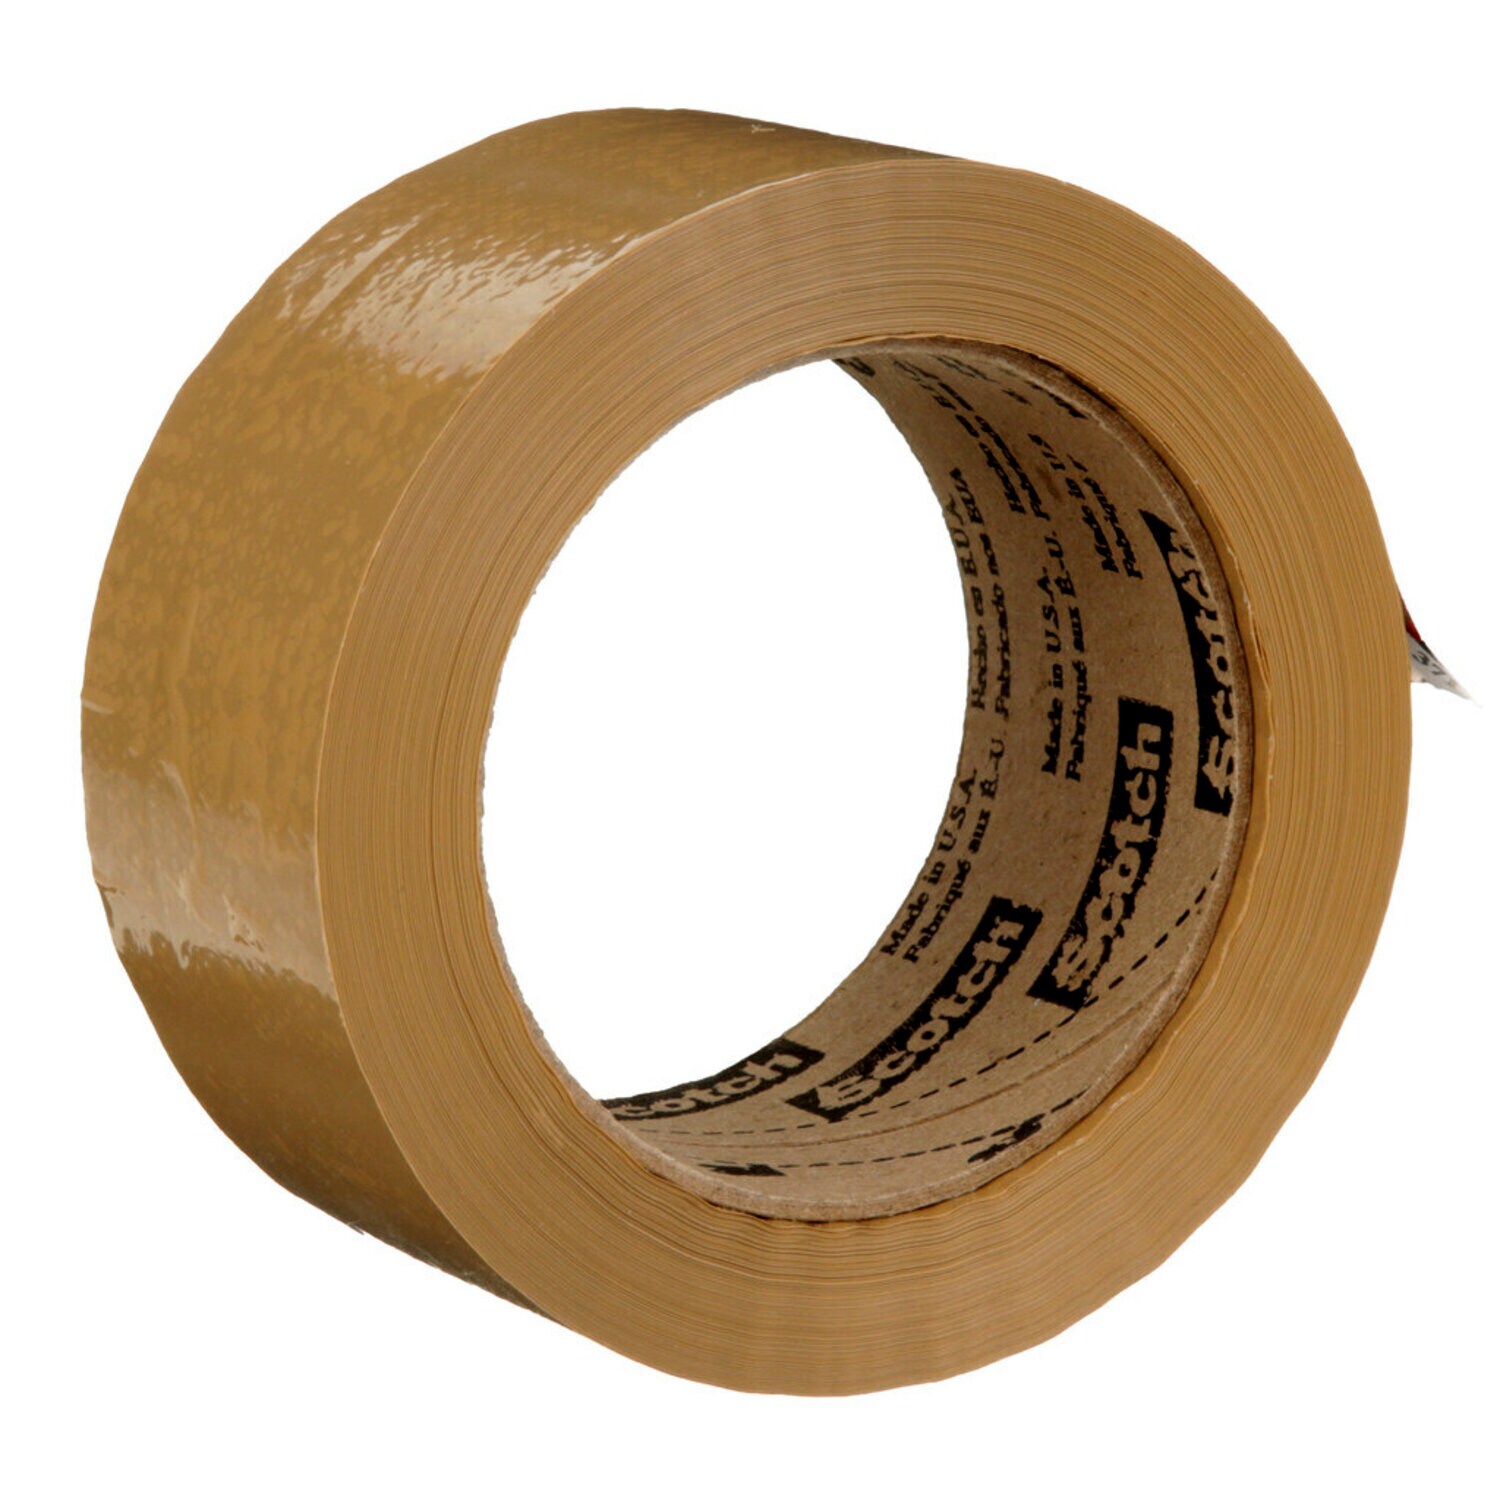 3M 2090 ScotchBlue Painters Tape - 0.25 in. (W) x 180 ft. (L) Masking Tape  Roll for Medium Adhesion. Painting Wall Preparation